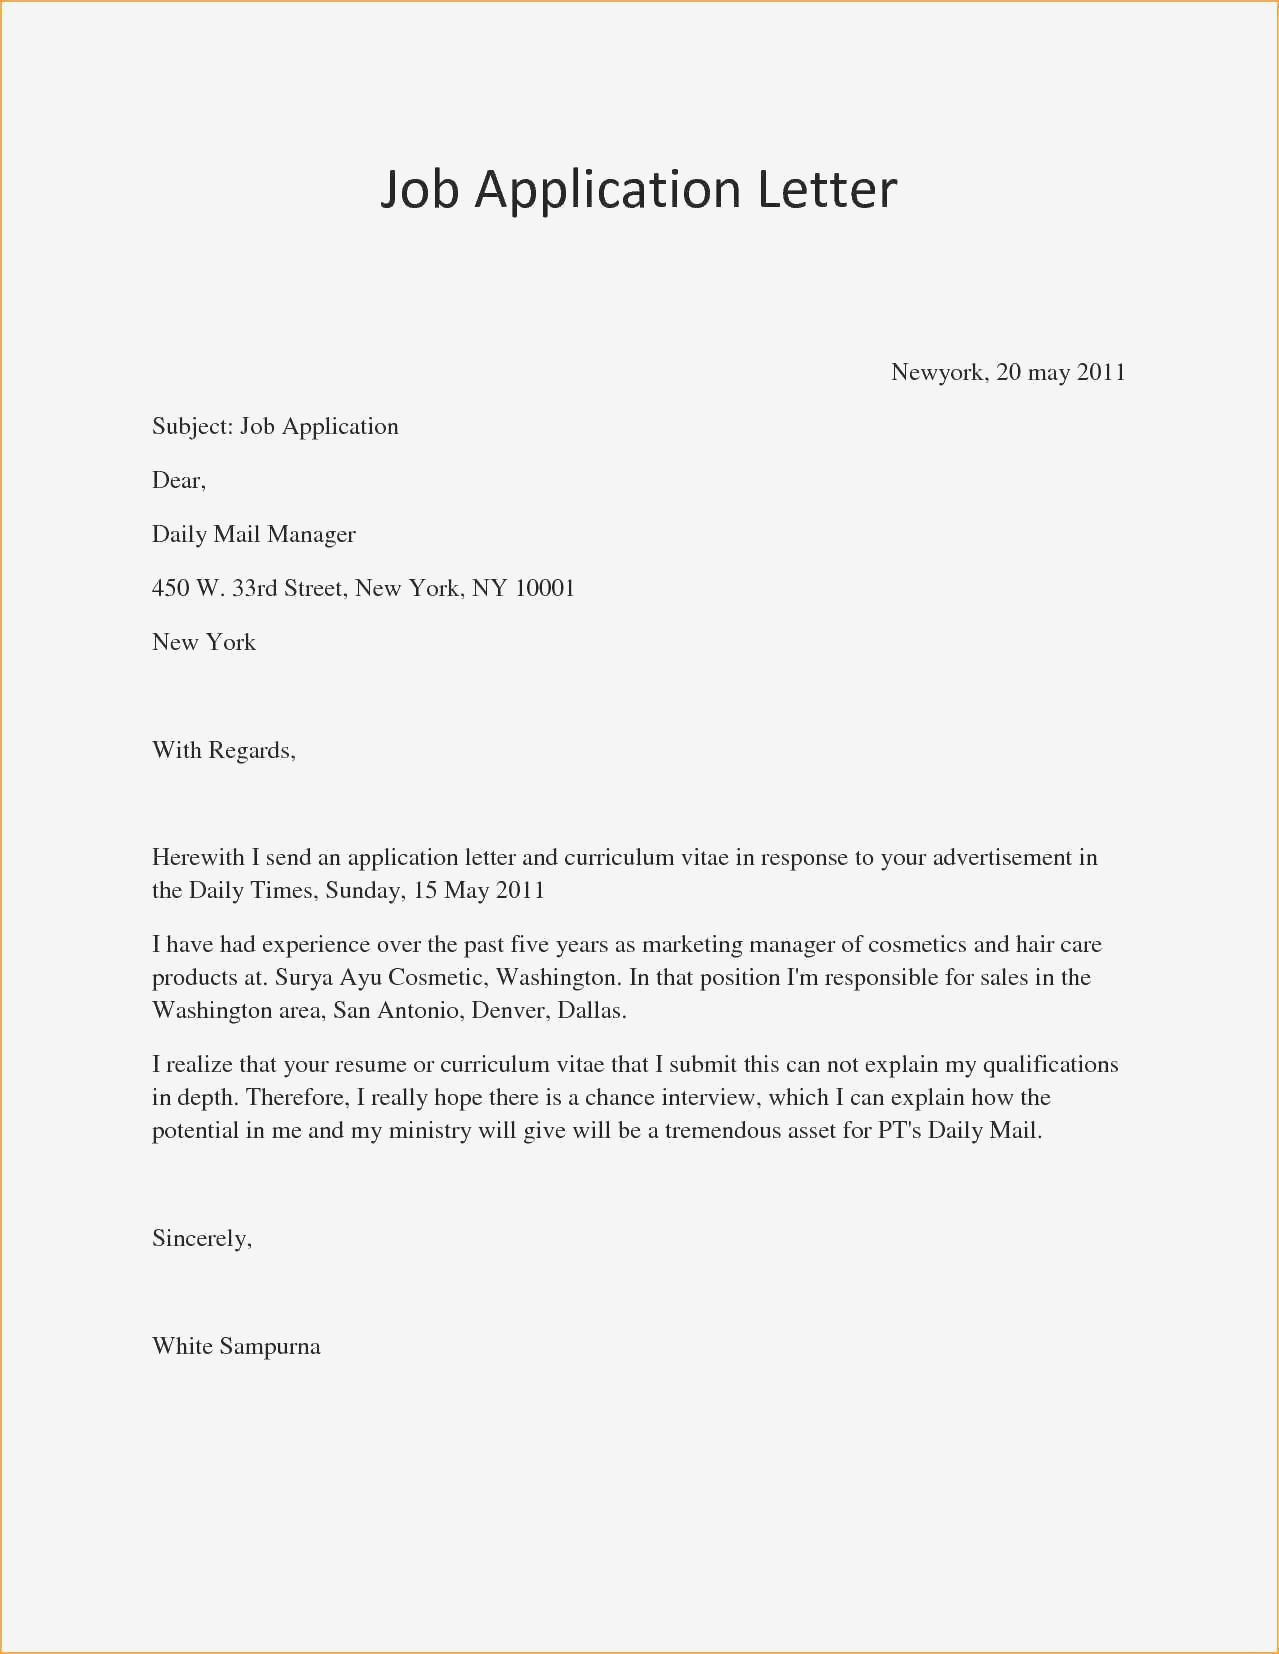 Great Cover Letters Simple Cover Letter For Job Application Superb Great Cover Letters For Job Applications Photo great cover letters|wikiresume.com